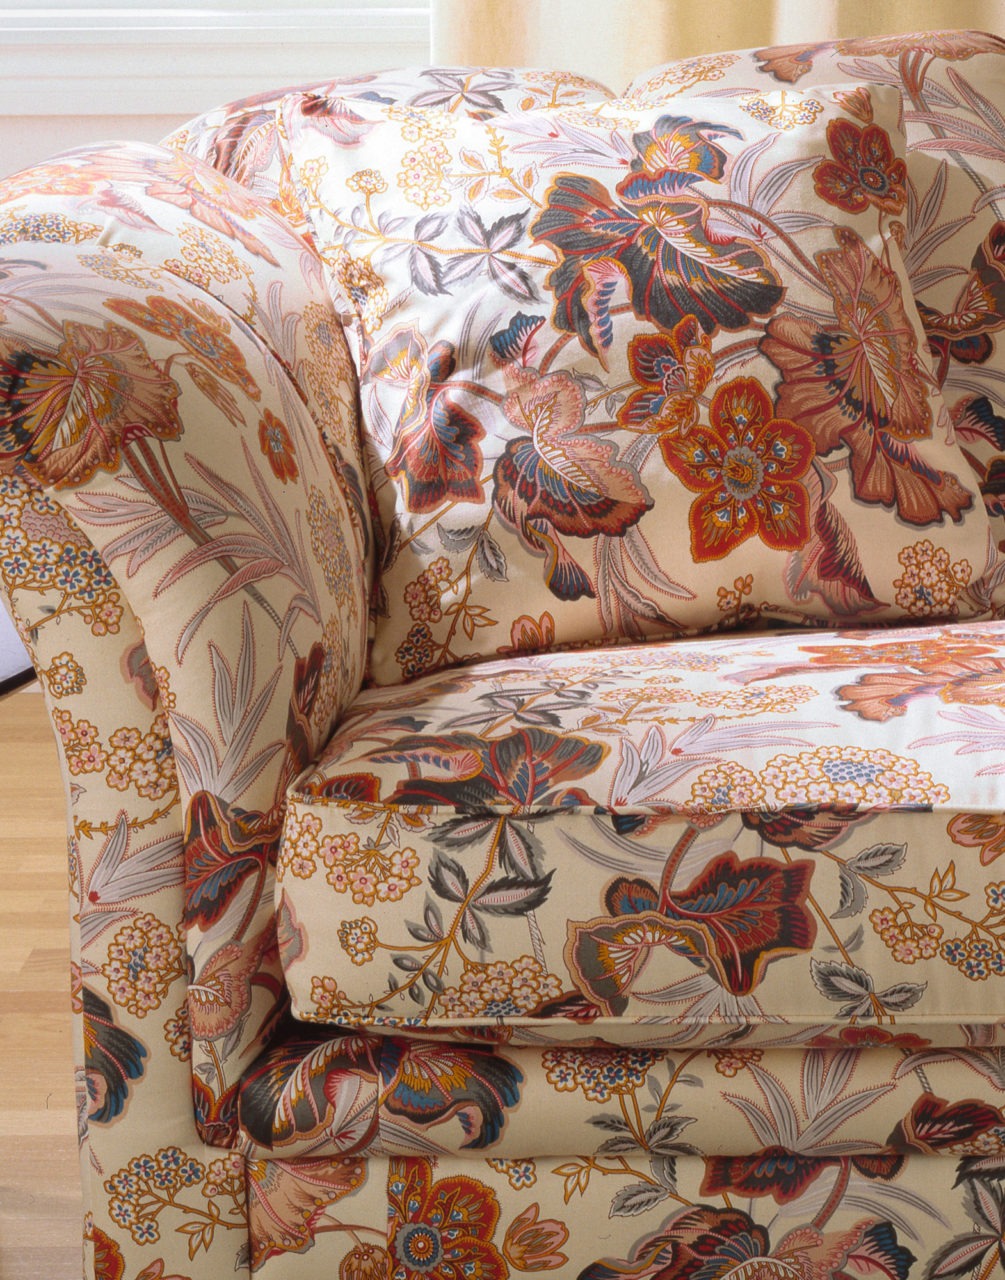 Close-up of sofa with floral pattern in red, blue, yellow and brown at brown.